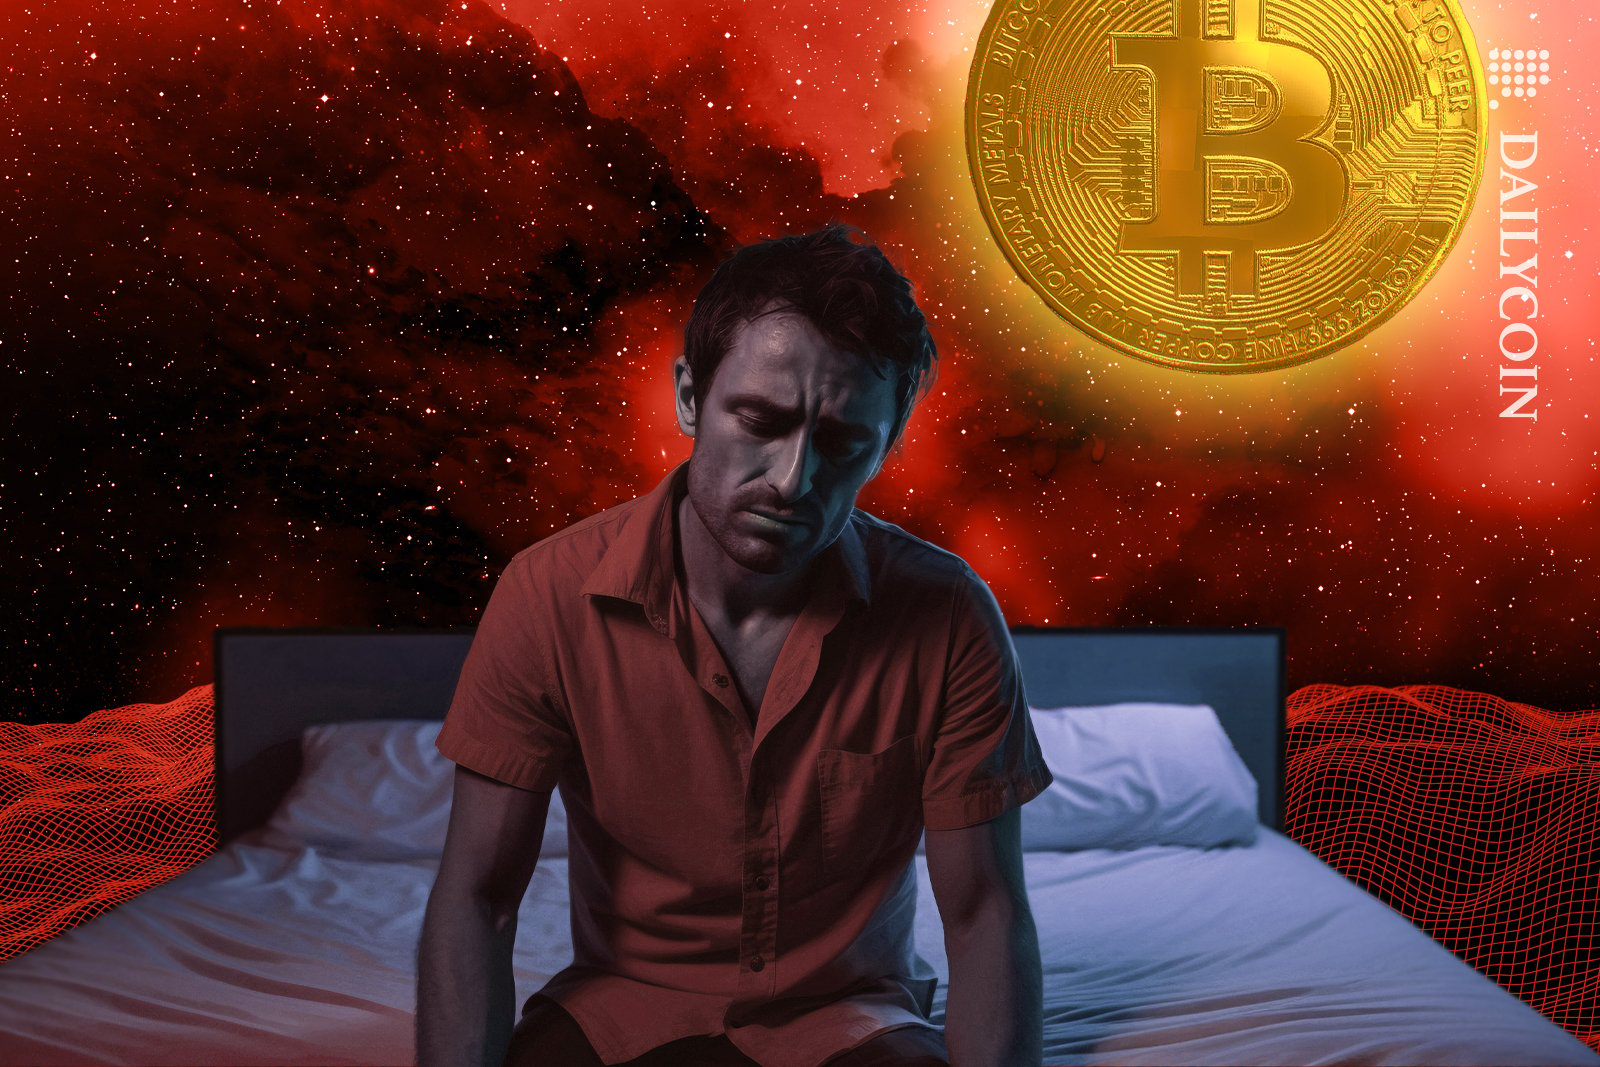 Guy sitting on the bed dissapointed with the bitcoin.